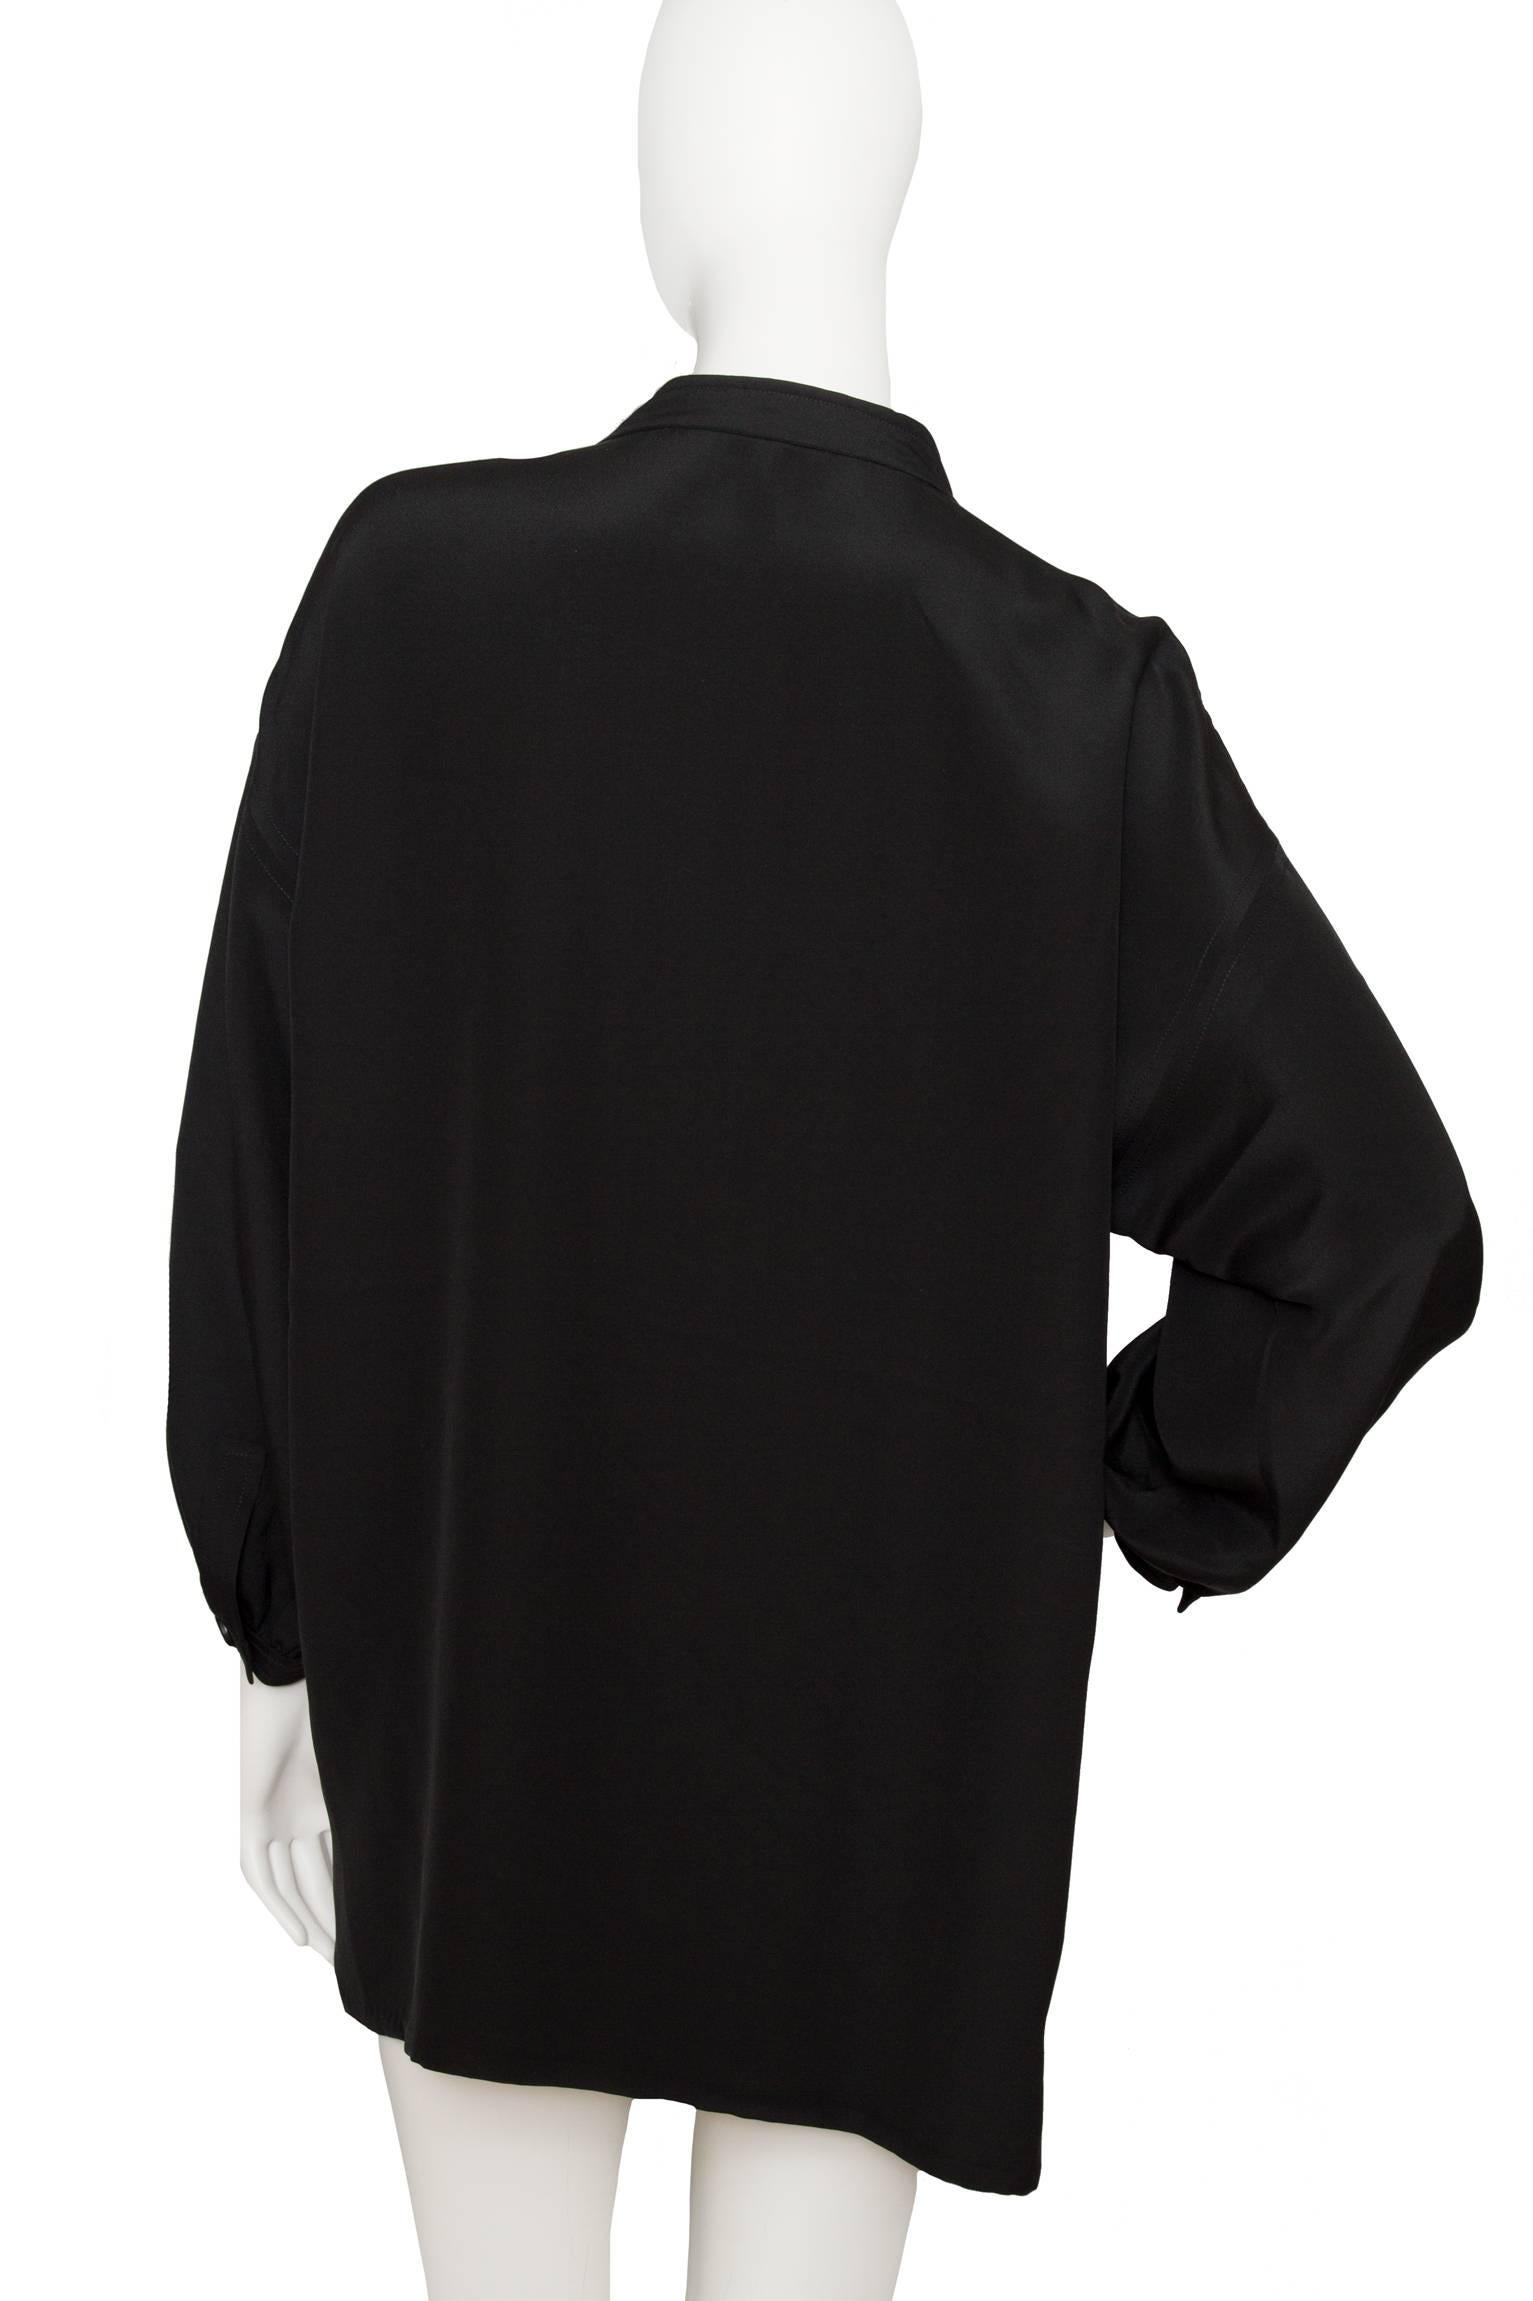 A classic and versatile 1980s black Givenchy blouse with long sleeves with one button cuffs and a two-button closure at the collar. Couture numbered behind Givenchy label

The size of the blouse corresponds to a modern size Large. 